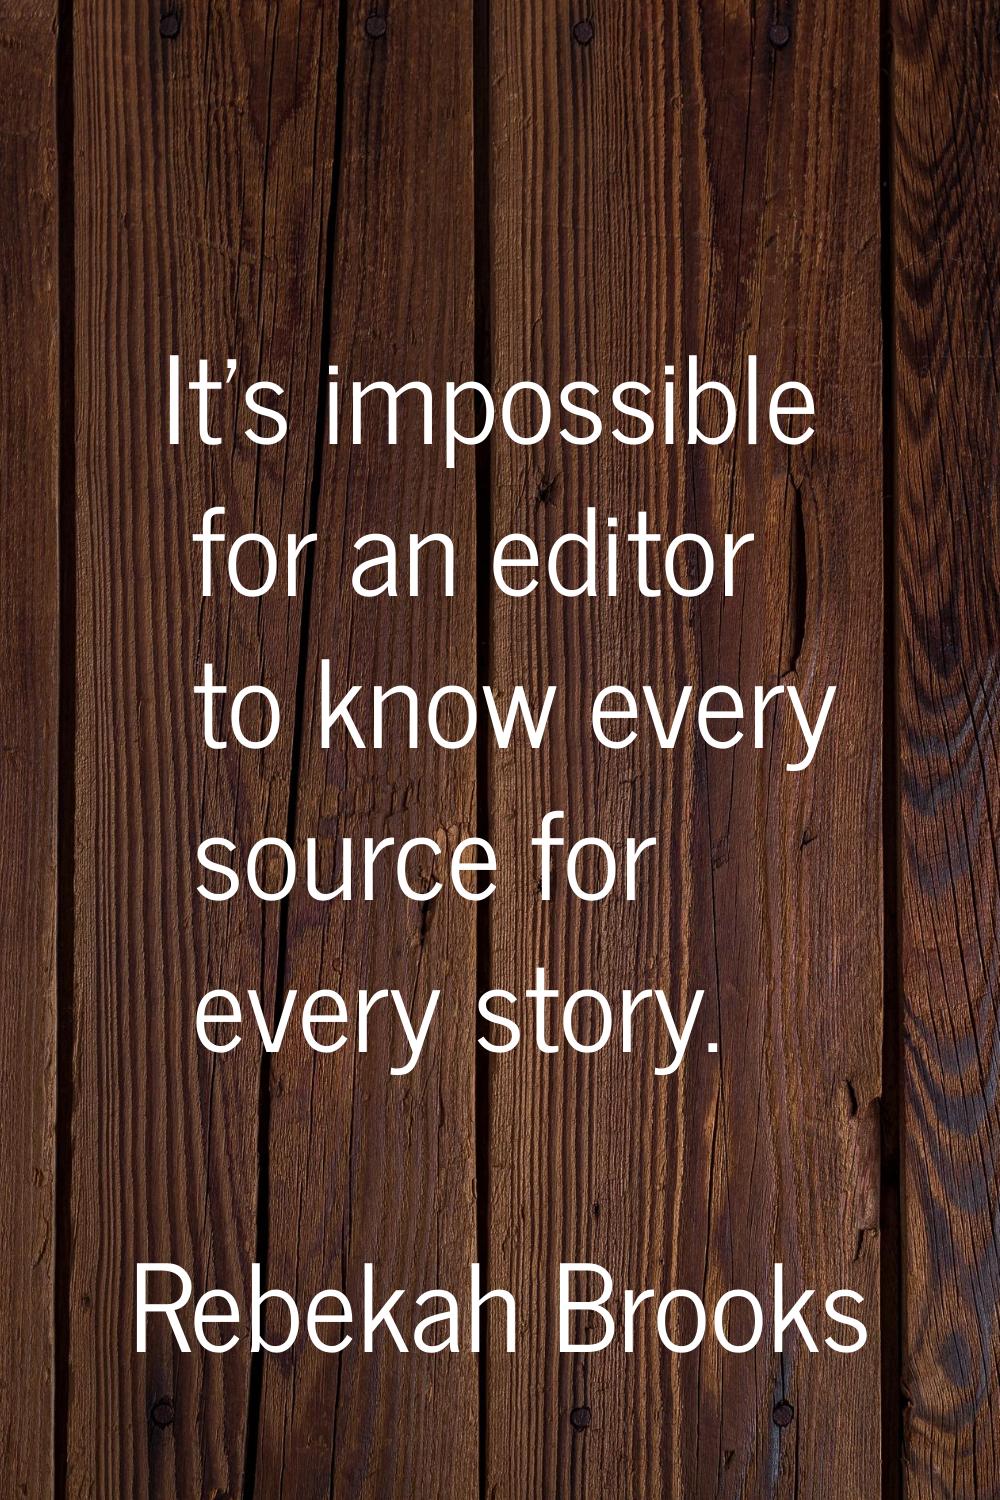 It's impossible for an editor to know every source for every story.